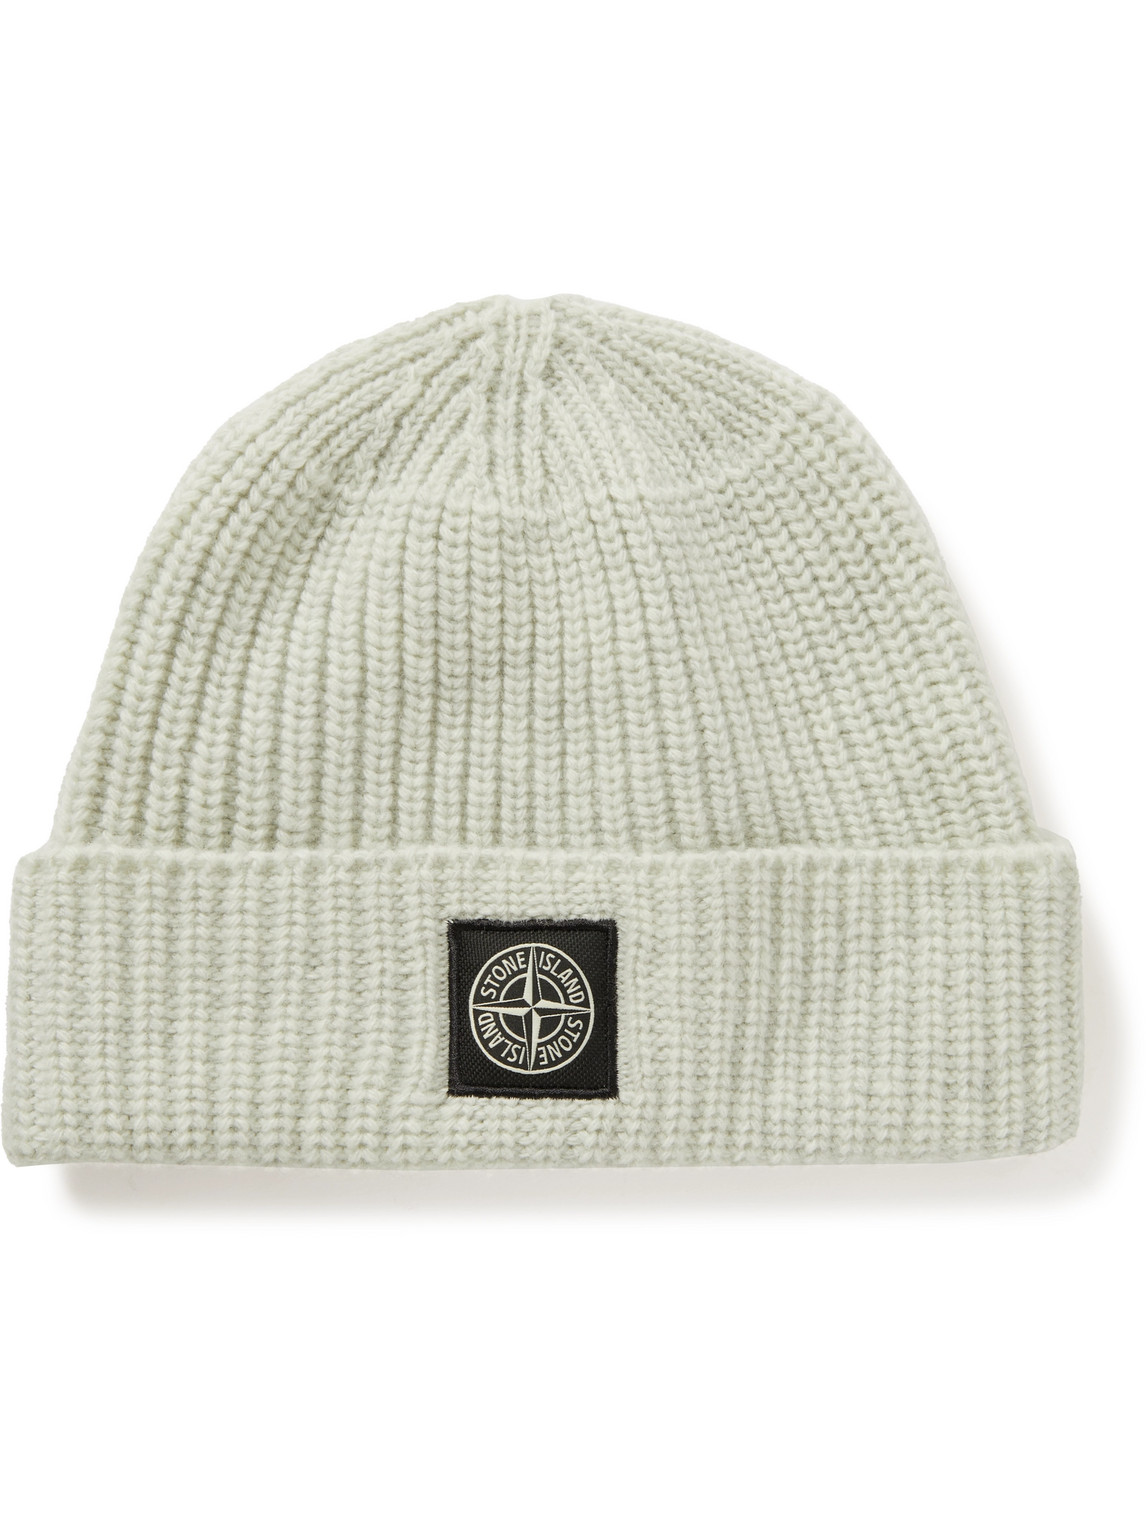 Mens Accessories Hats Stone Island Wool Beanie in White for Men 